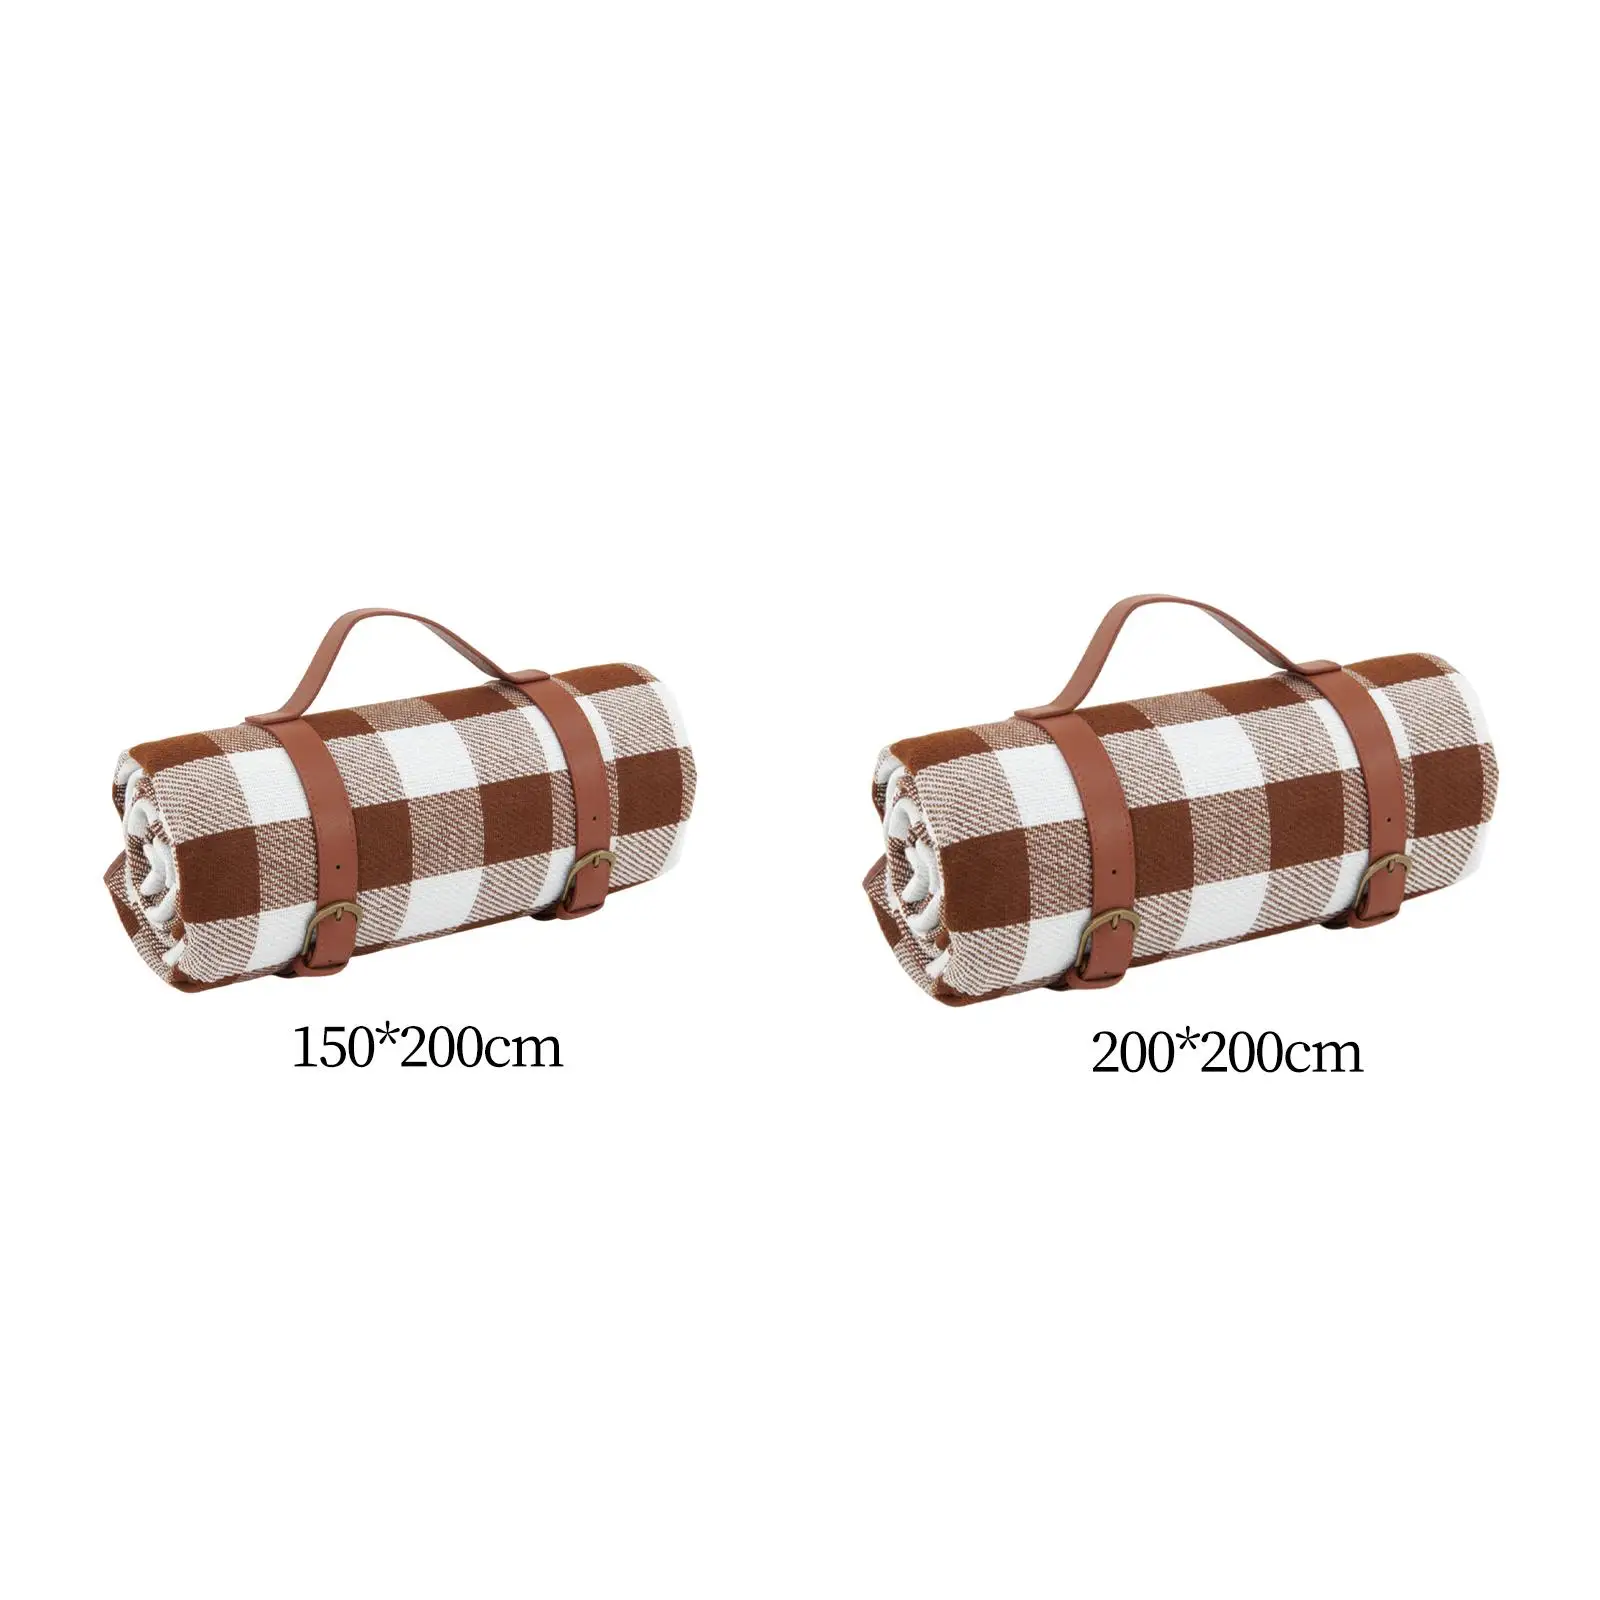 Picnic Blanket Outdoor Blanket PU Leather Handle beach mat for Camping